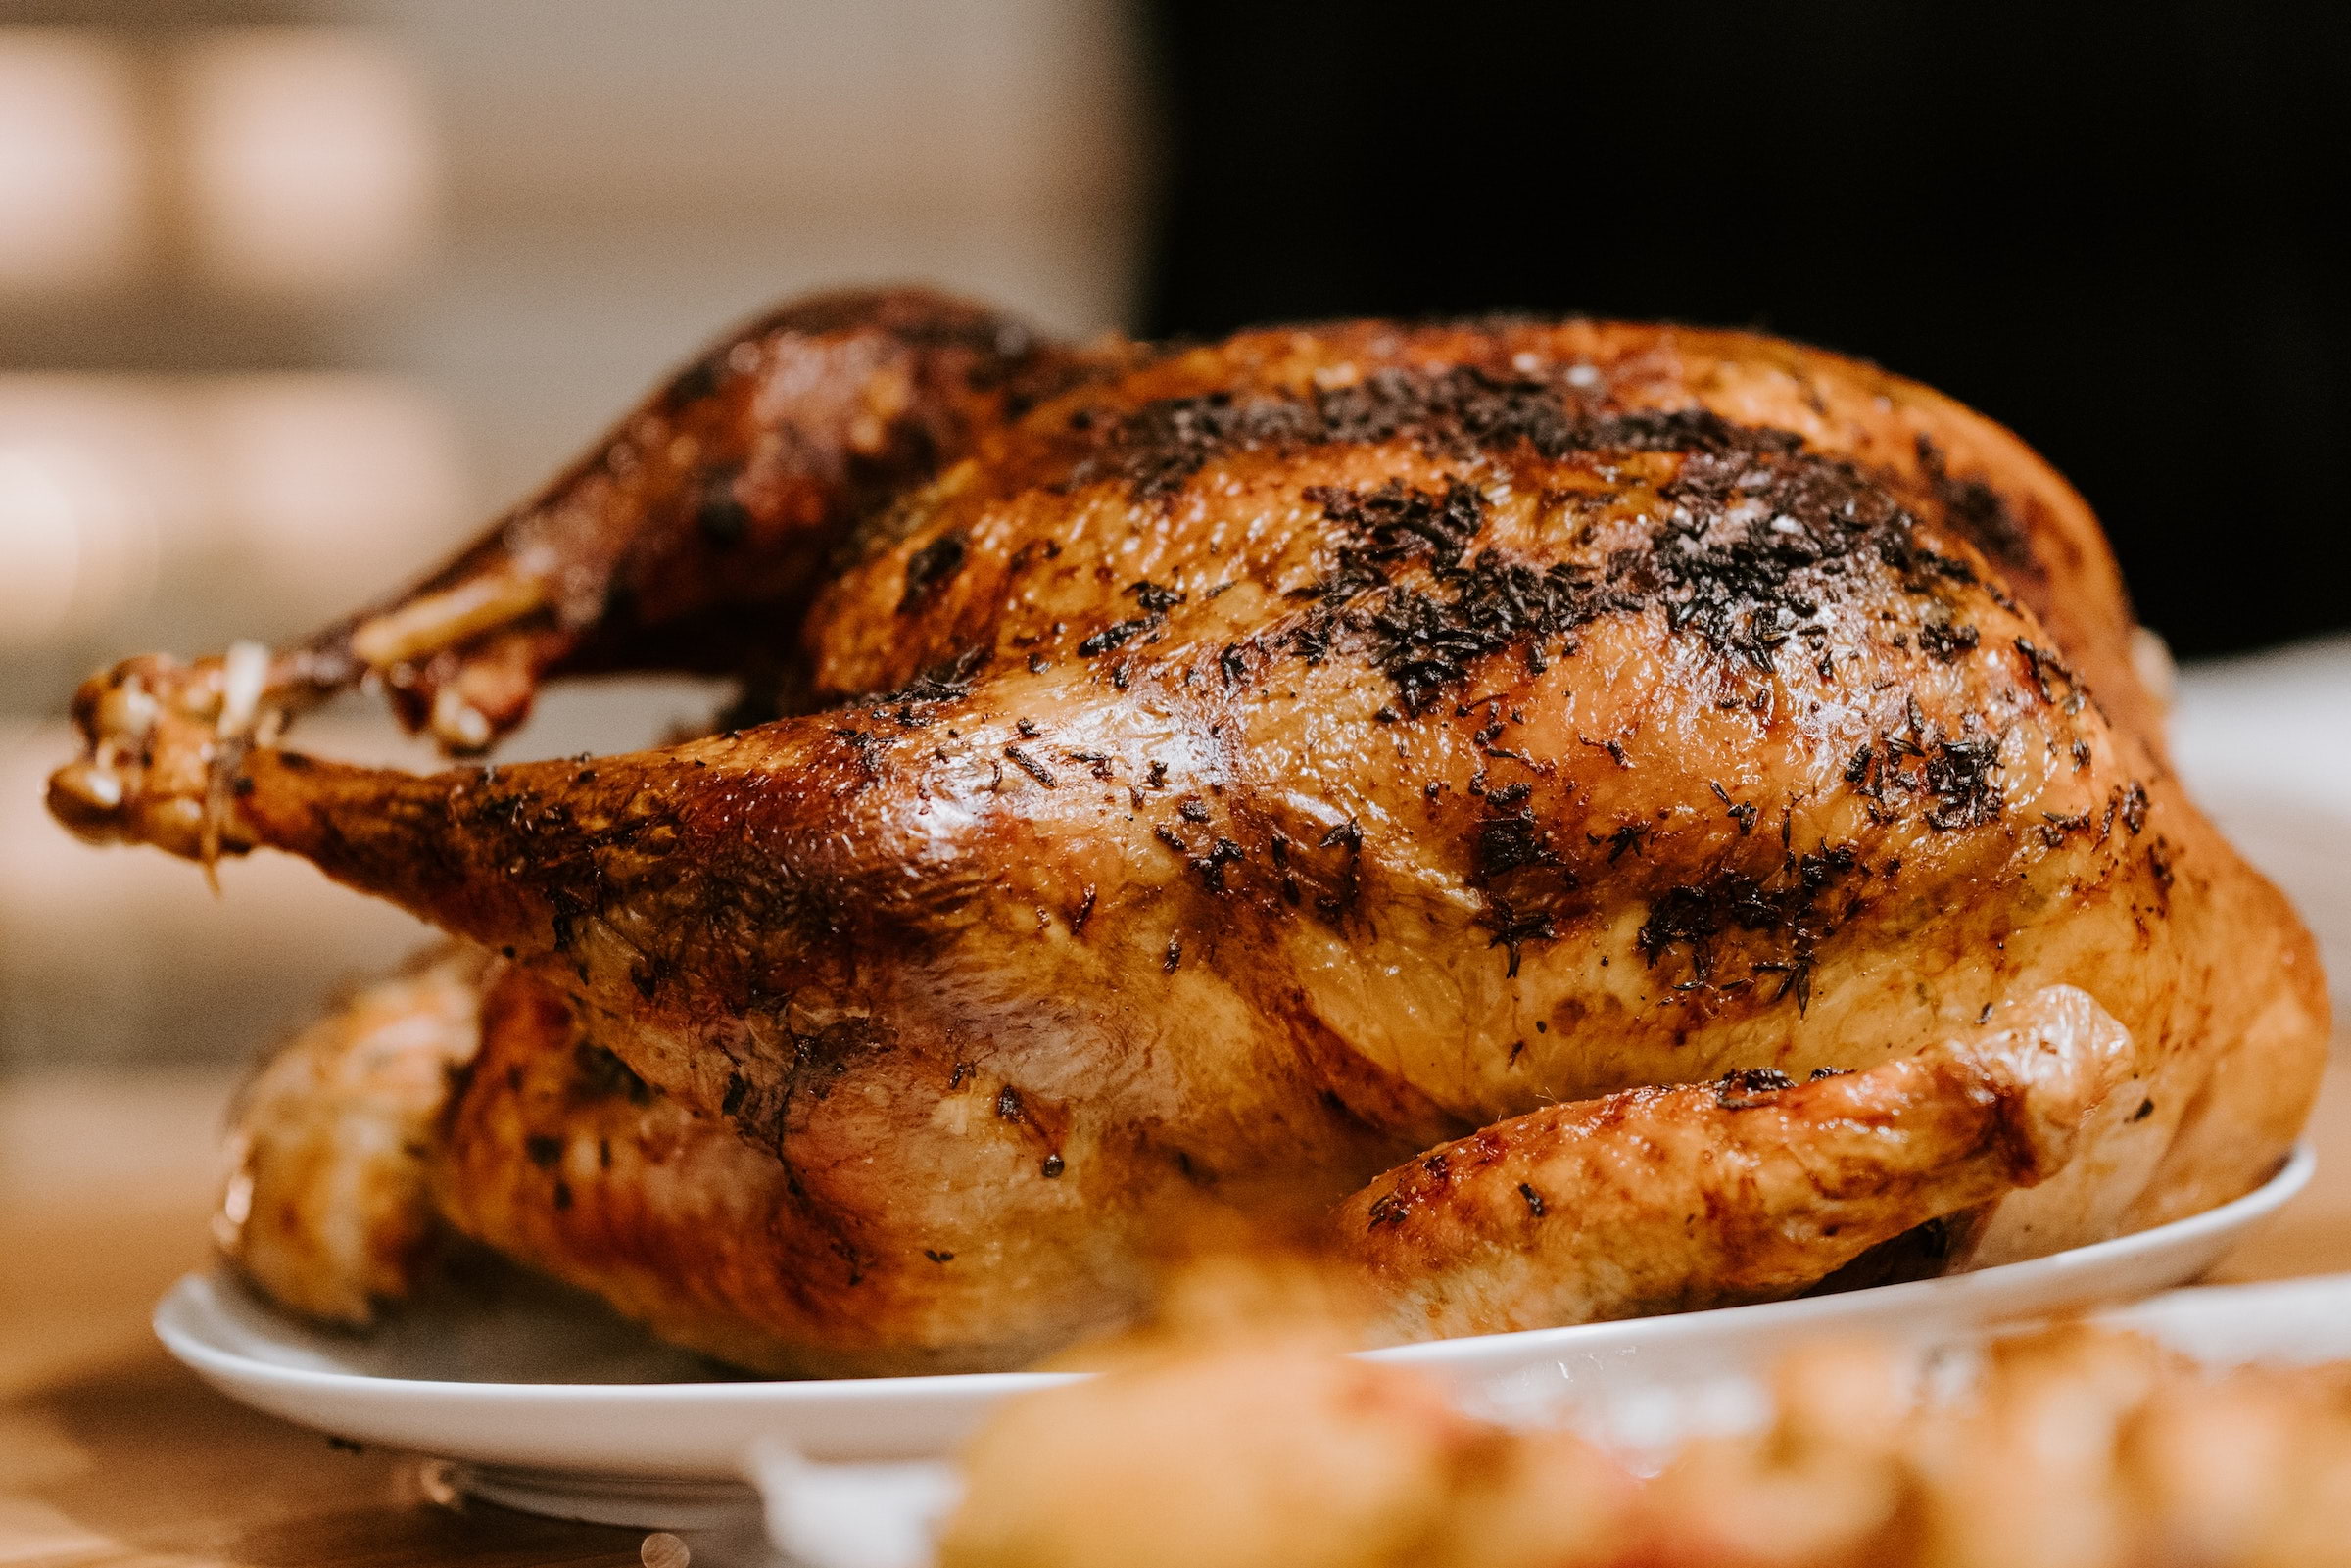 Where to celebrate Thanksgiving in London